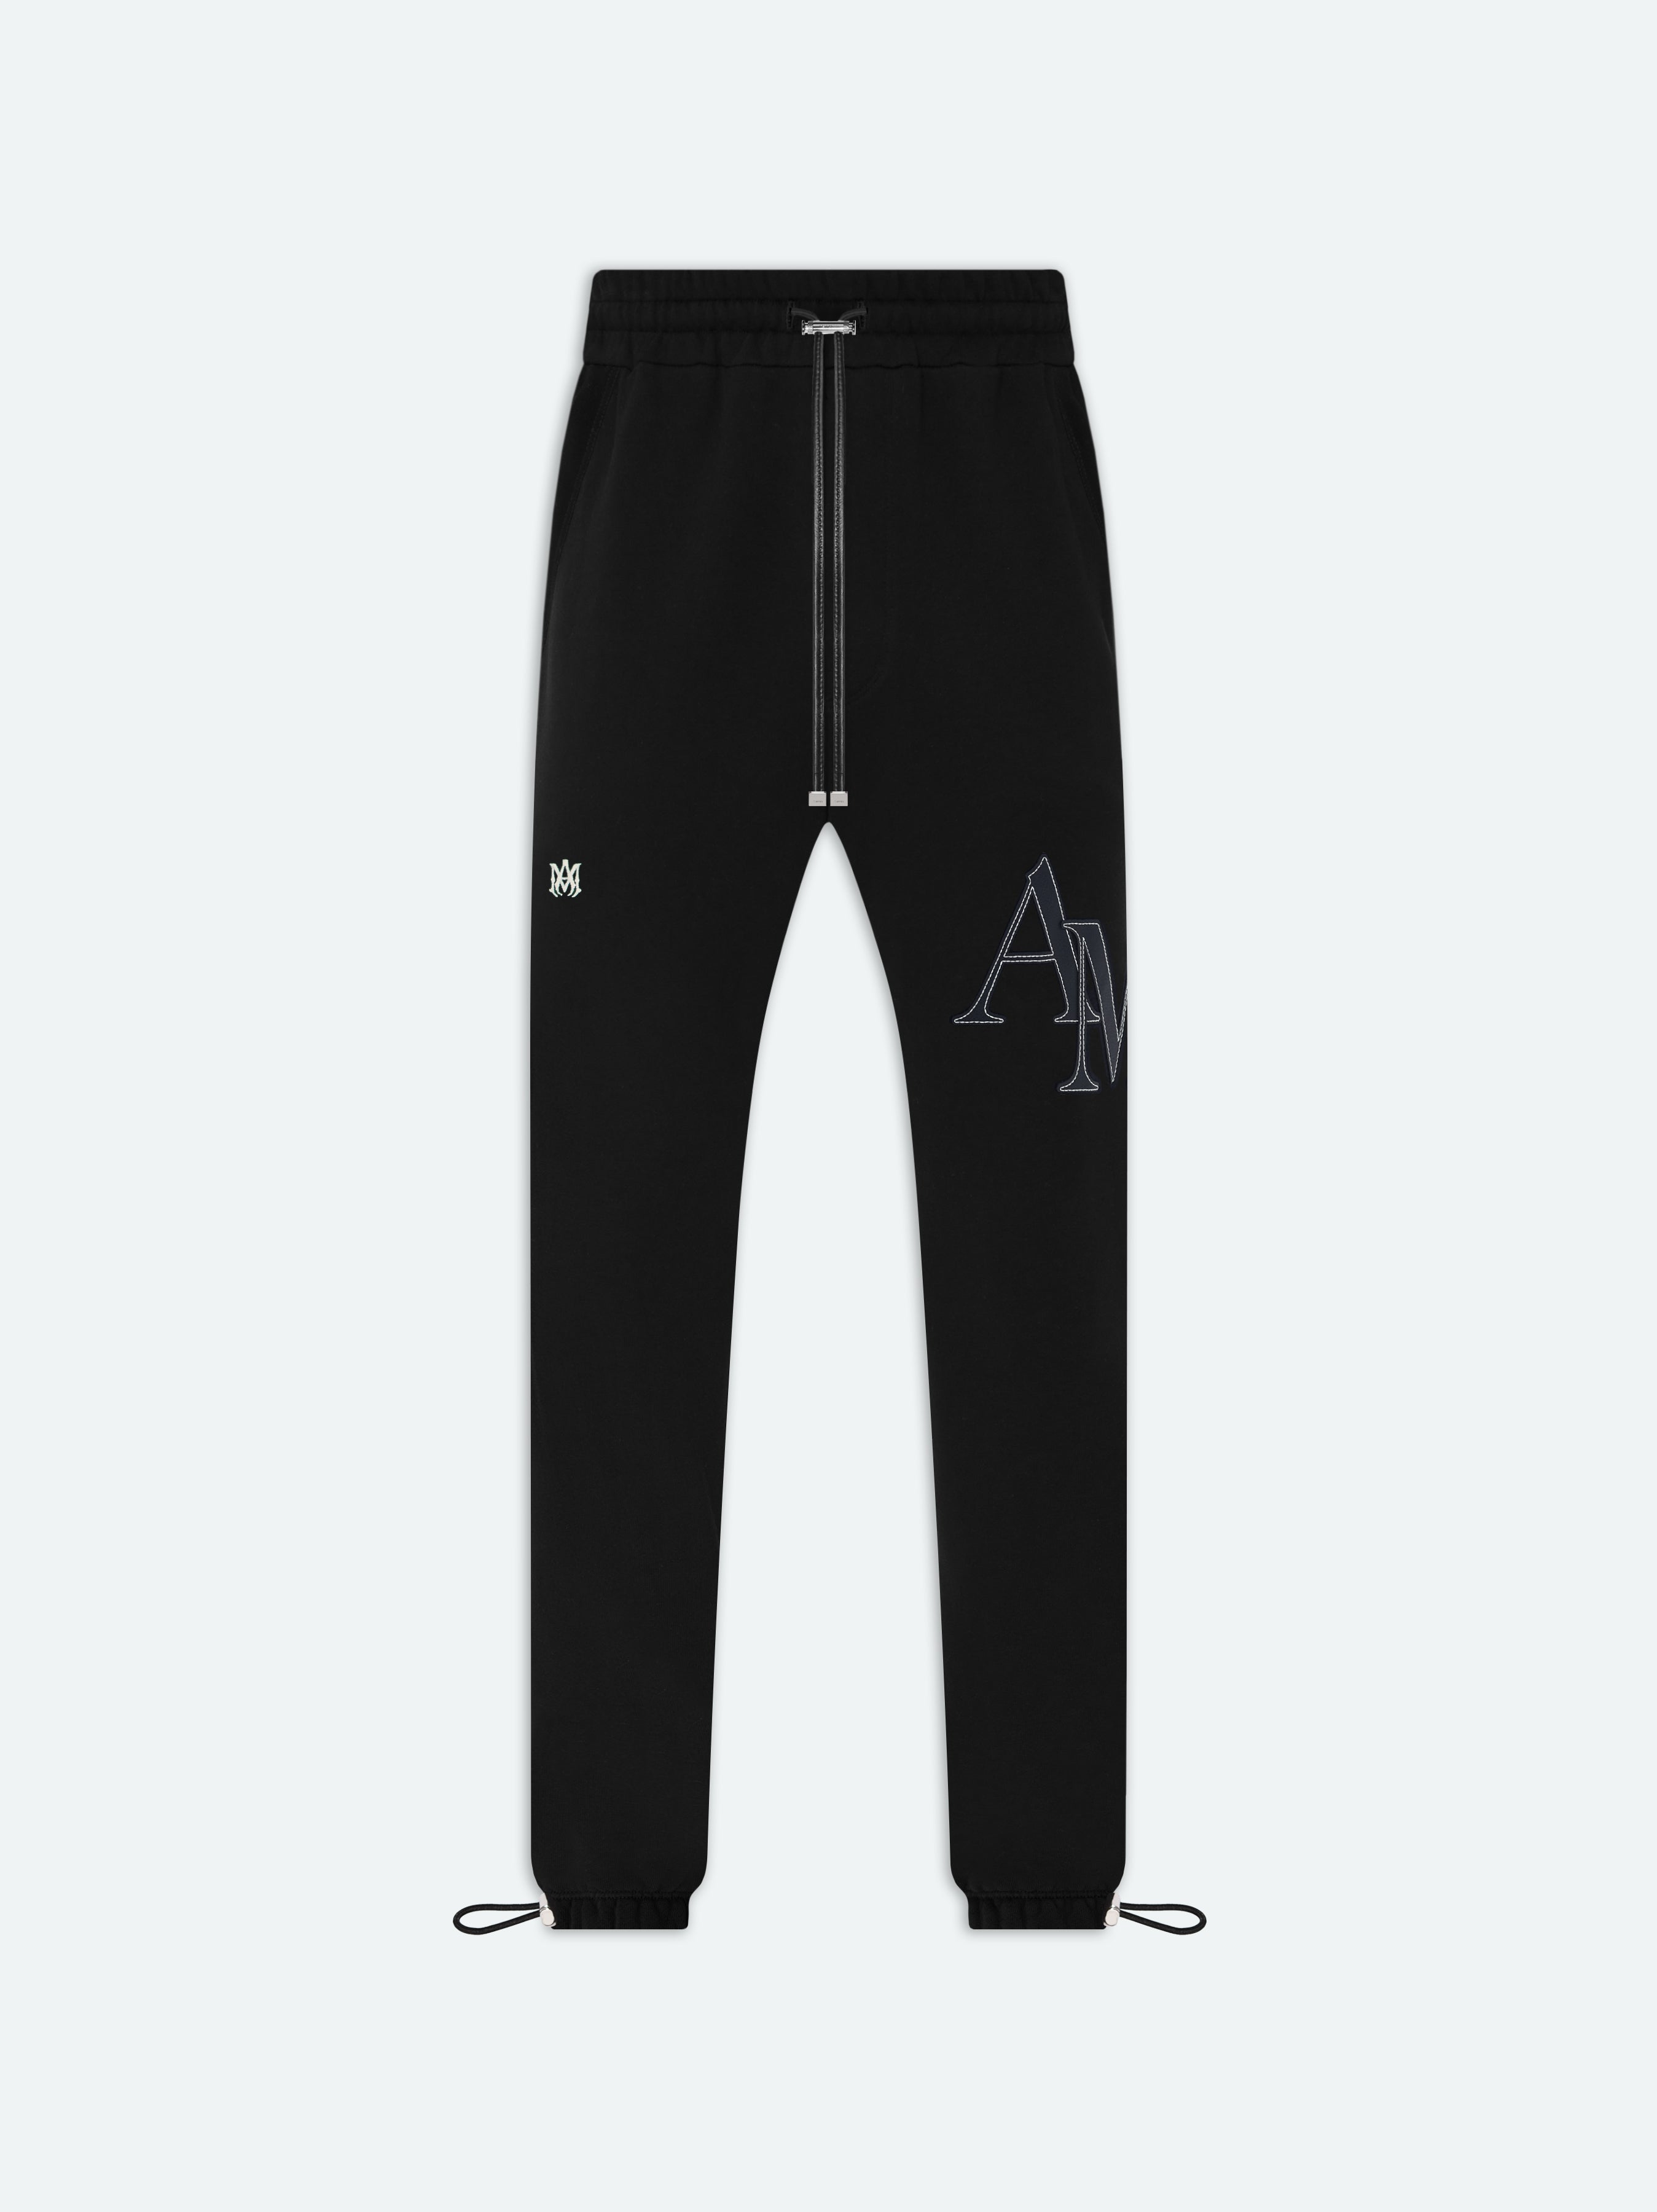 Product AMIRI STAGGERED SWEATPANT - Black featured image